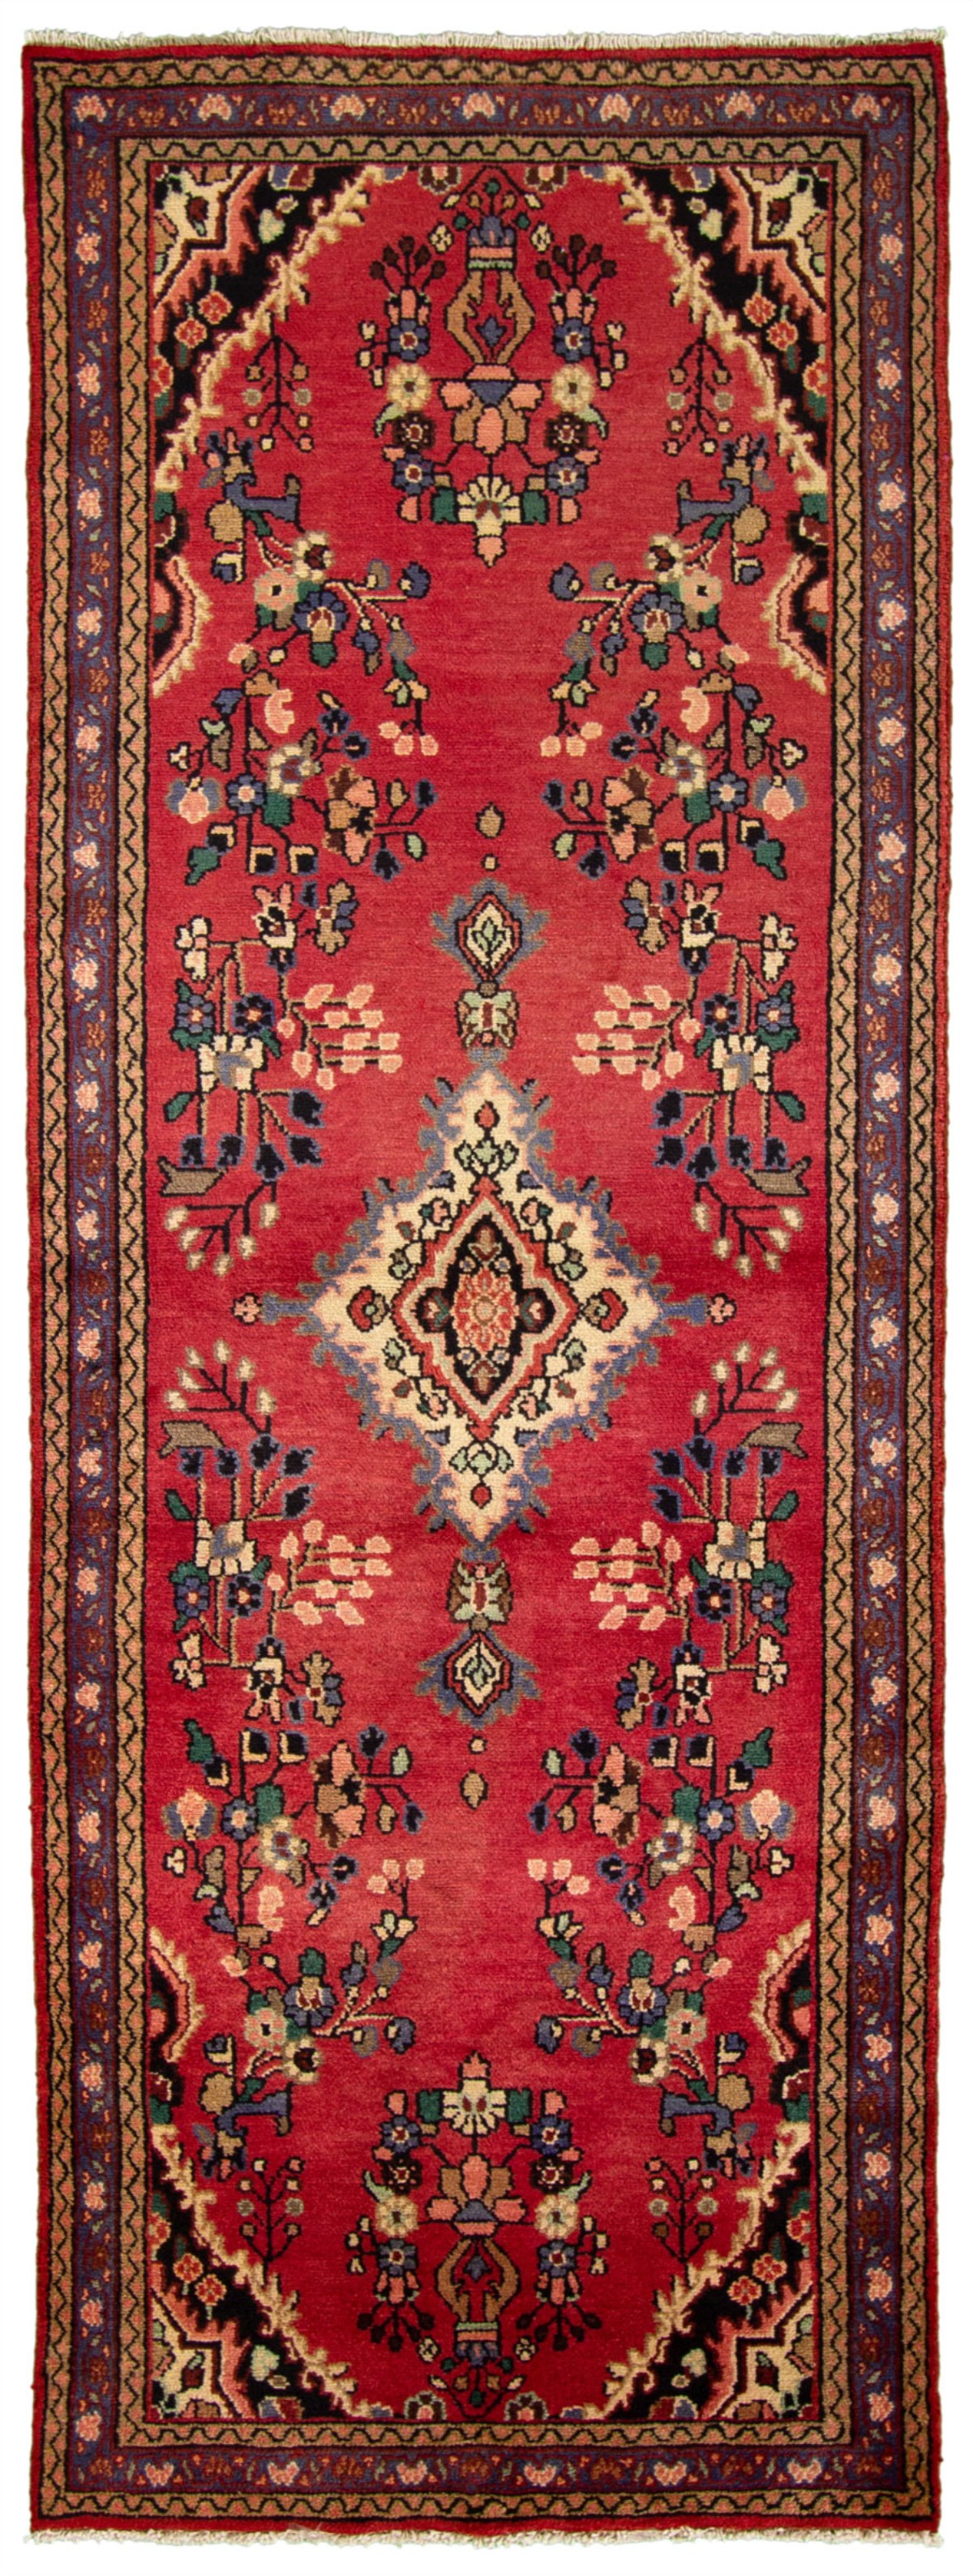 Hand-knotted Hamadan Red Wool Rug 3'6" x 9'10"  Size: 3'6" x 9'10"  